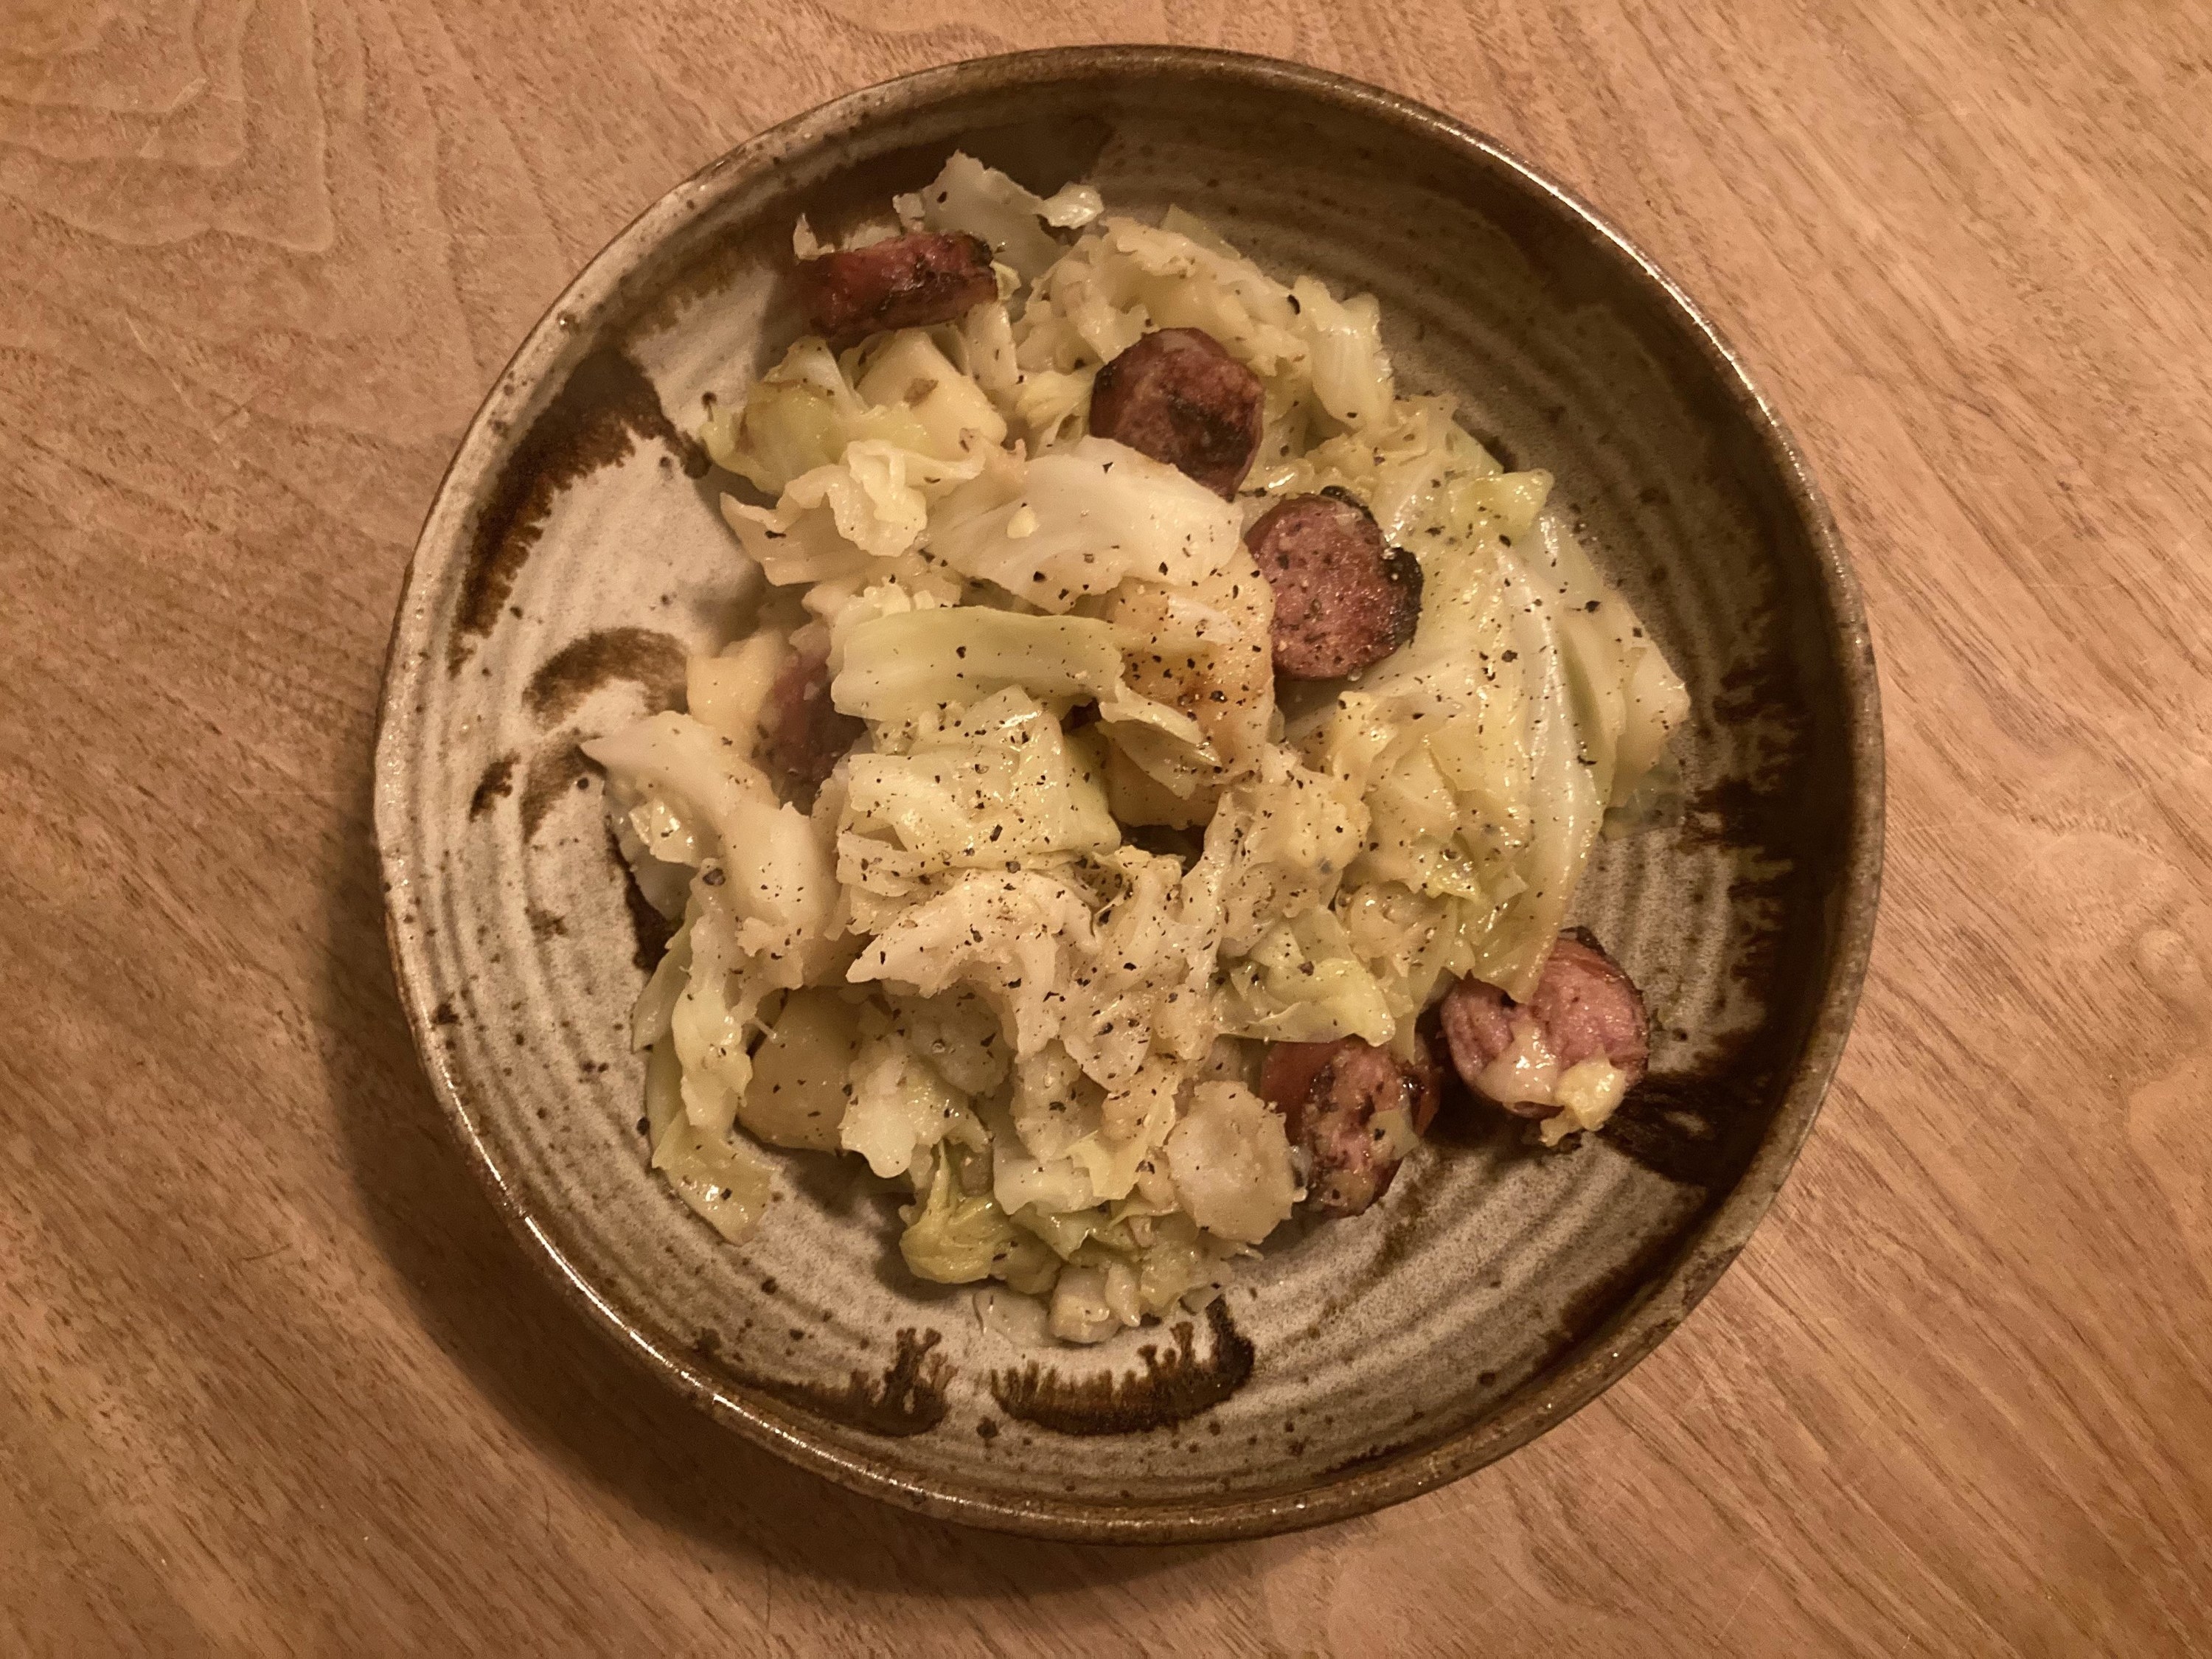 Cabbage and sausage.